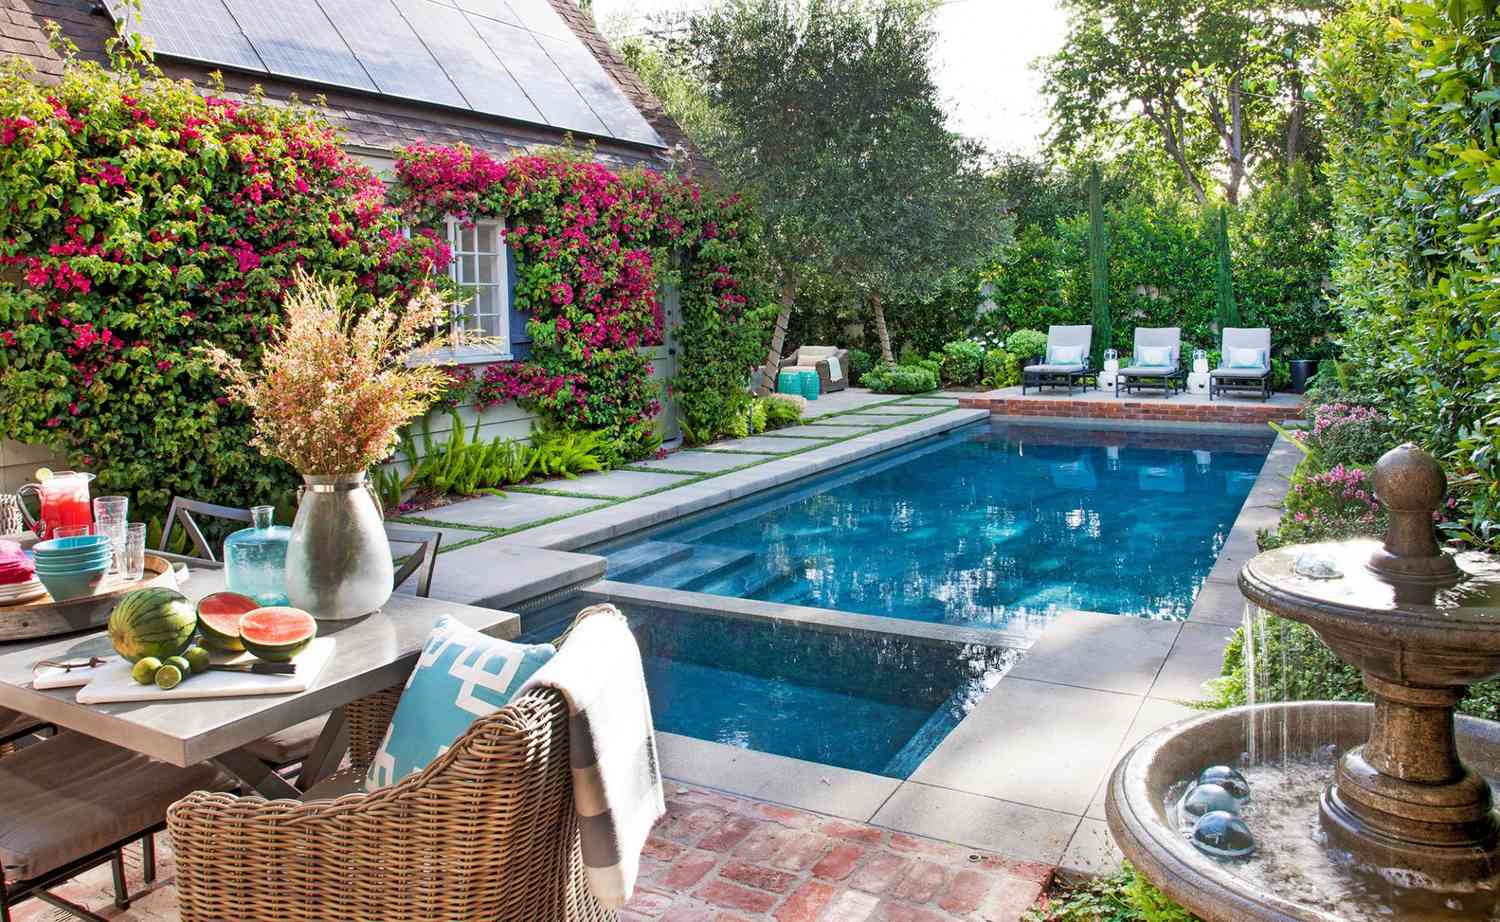 Planning a Small Space for the Perfect Pool